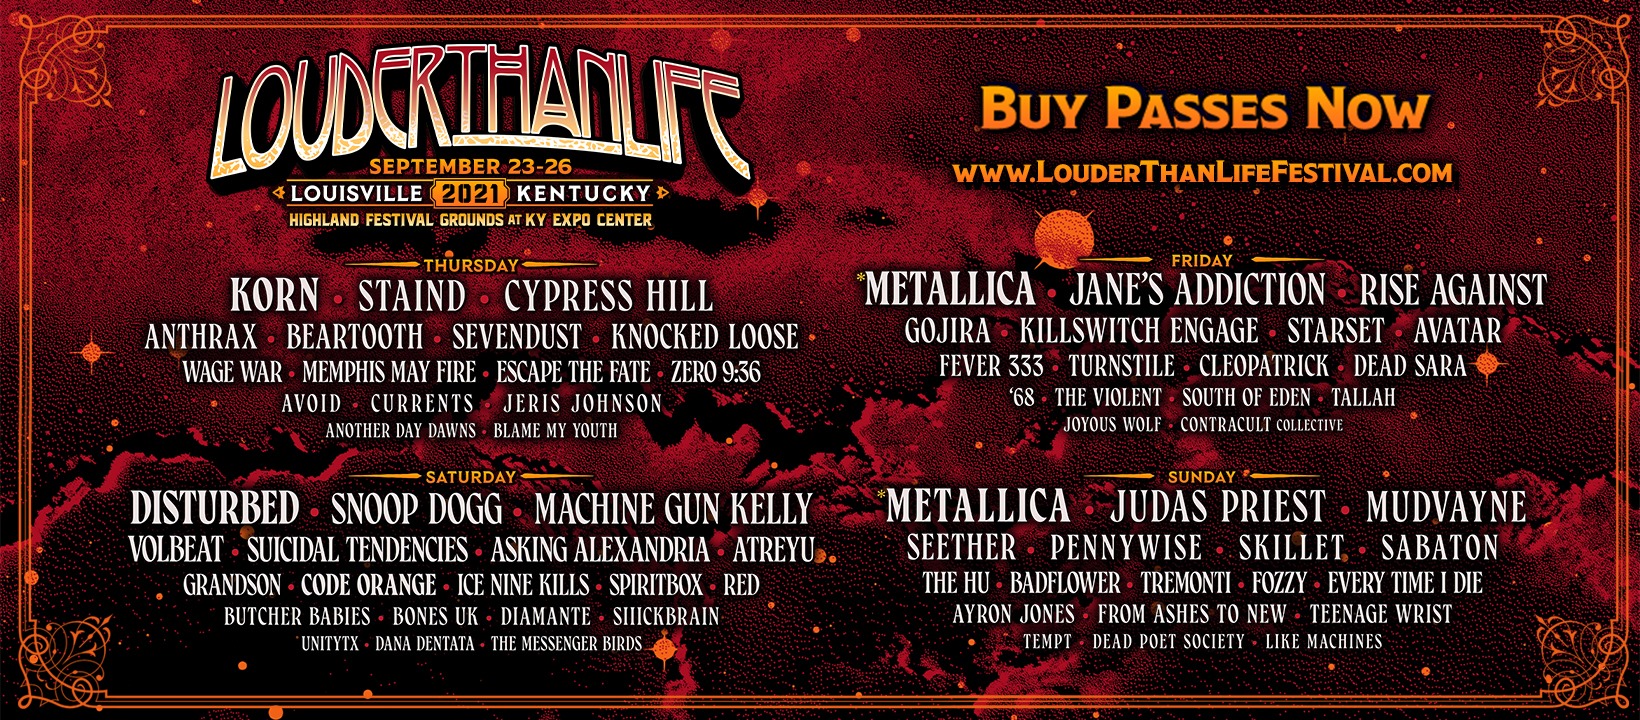 Louder Than Life Announces Lineup For The World’s Largest Rock ‘N’ Roll Whiskey Festival